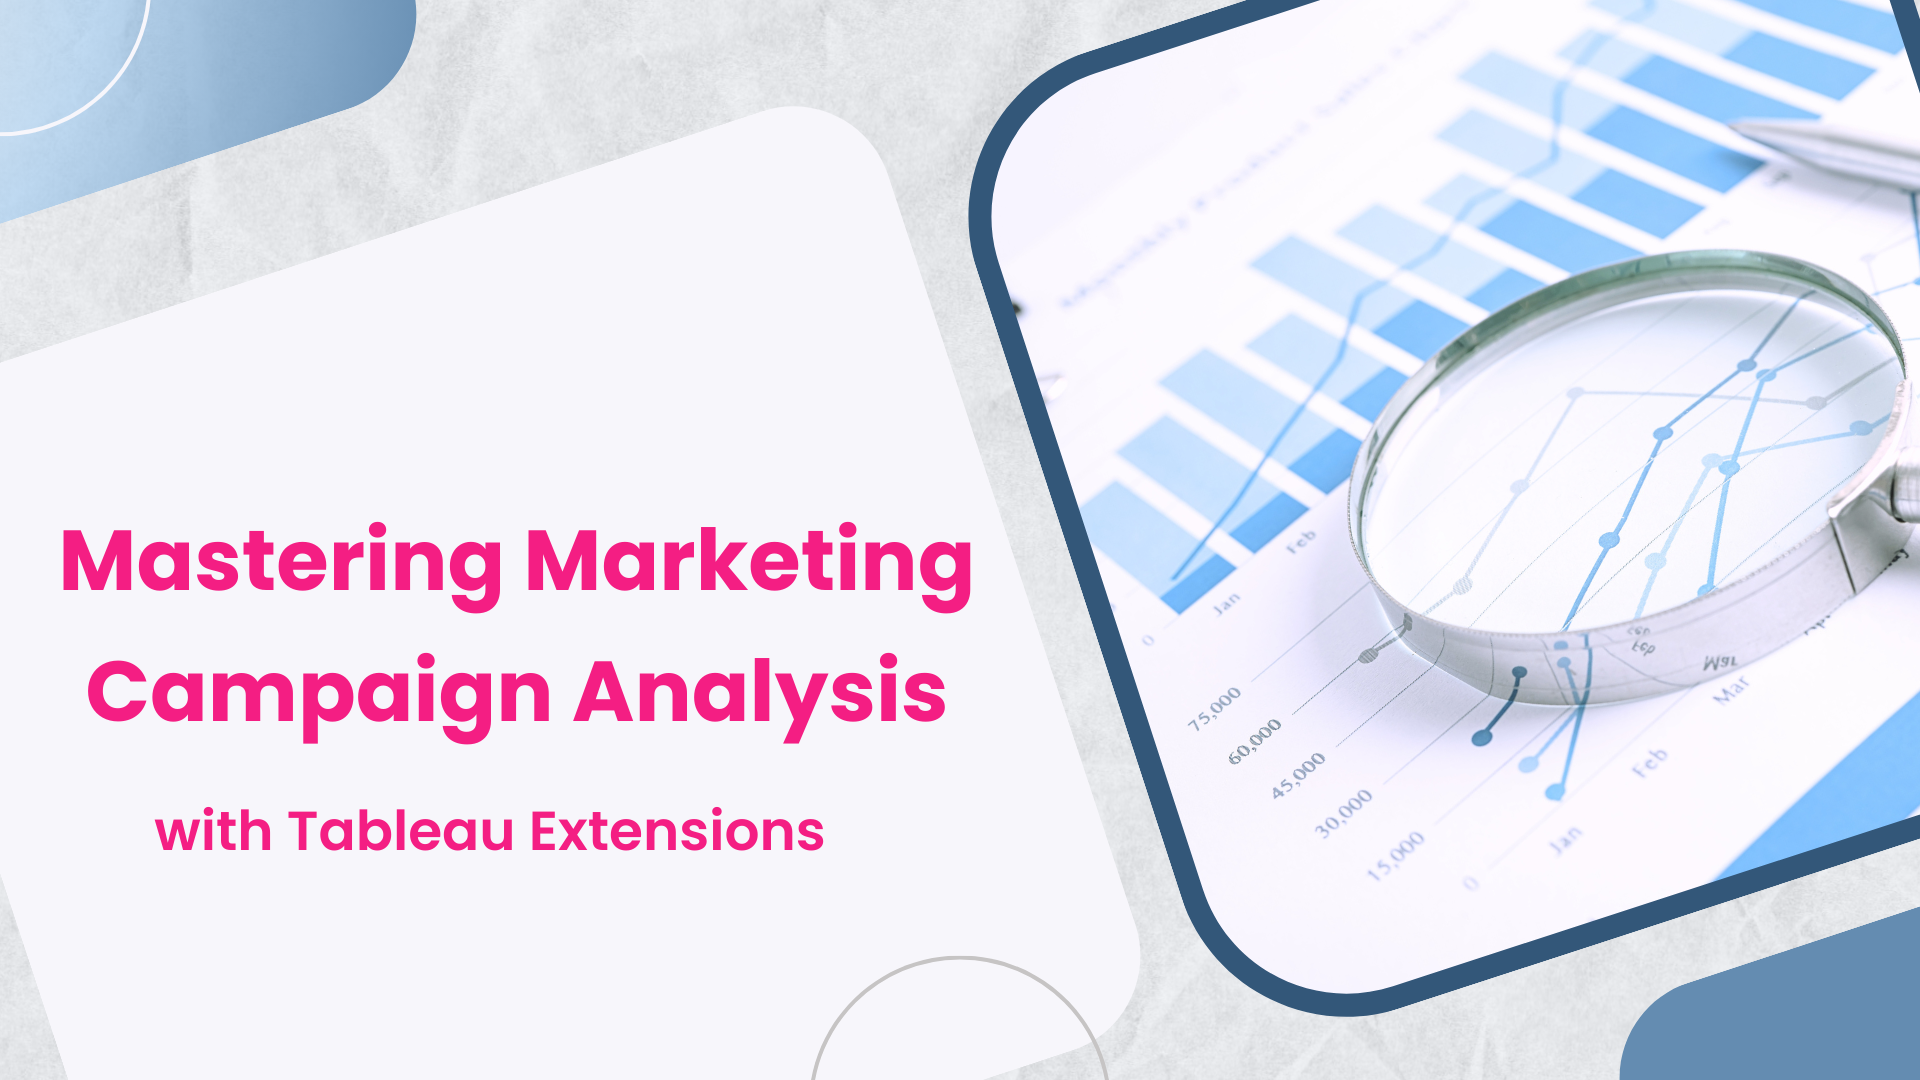 Mastering Marketing Campaign Analysis with Tableau extensions